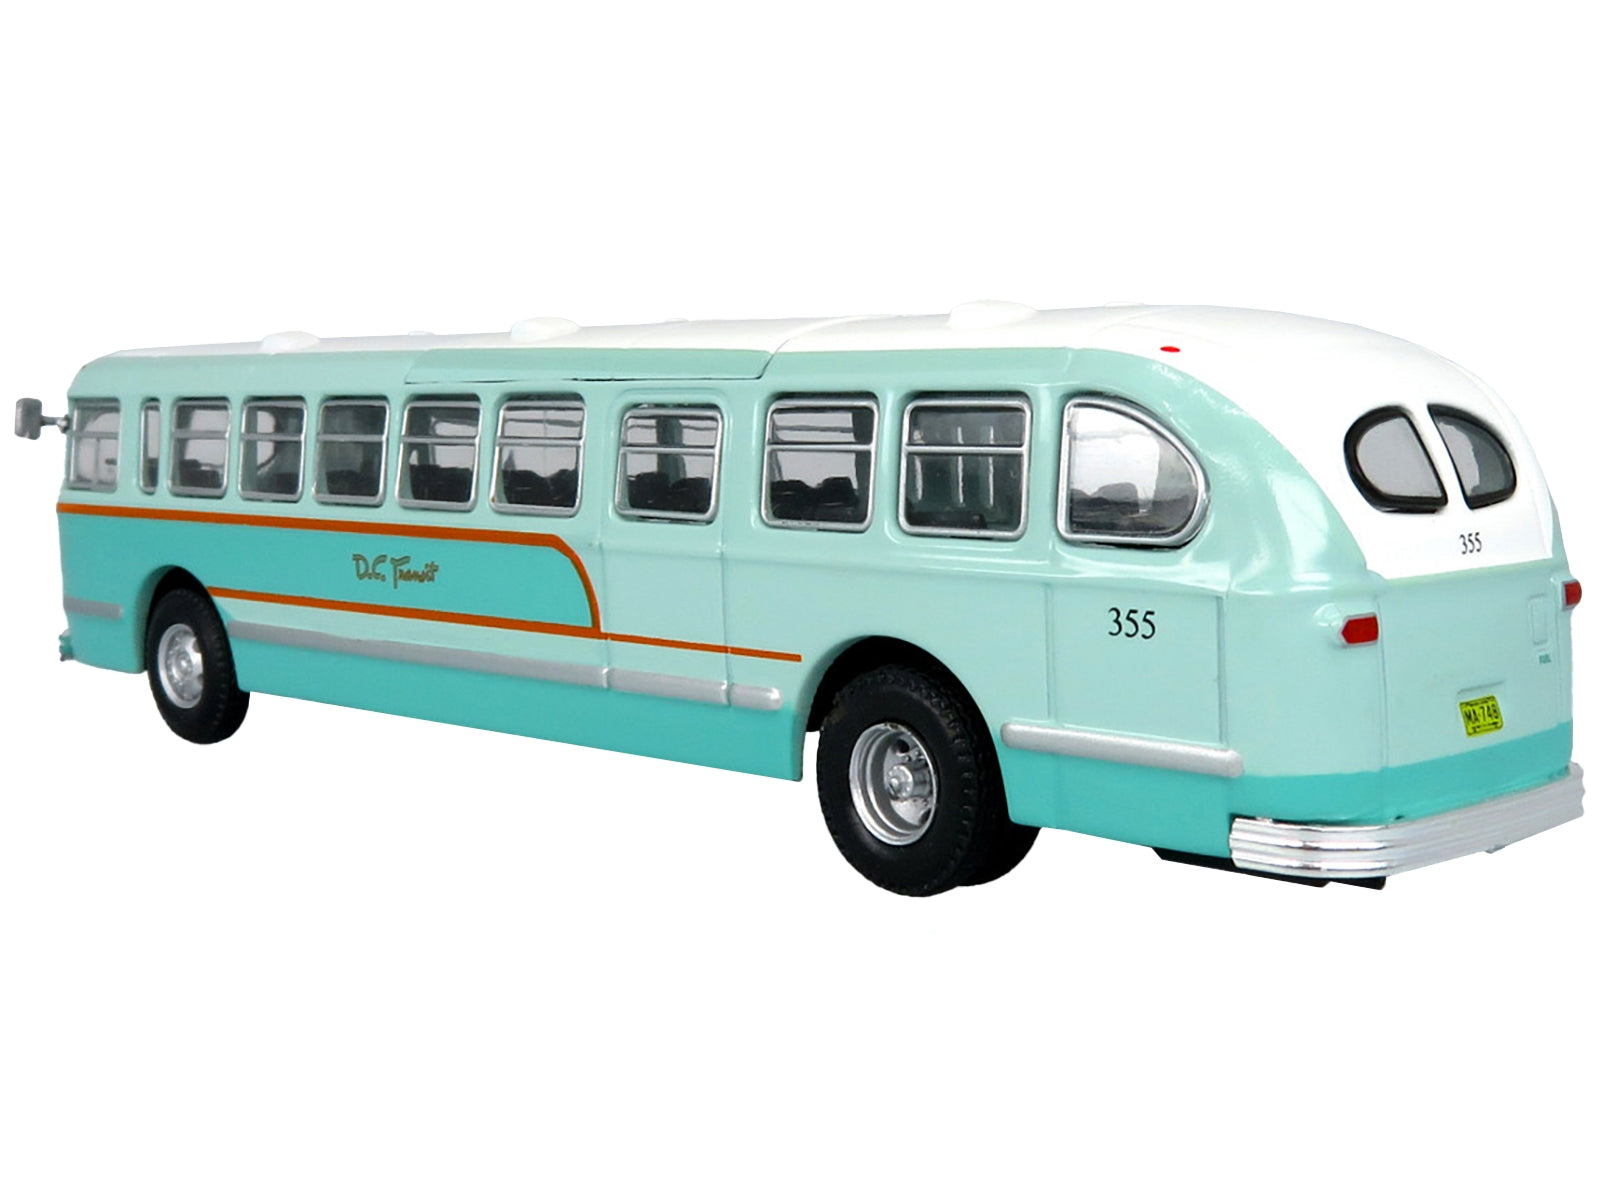 1952 CCF-Brill CD-44 Transit Bus DC Transit "30 17th & Penna SE" "Vintage Bus & Motorcoach Collection" 1/87 (HO) Diecast Model by Iconic Replicas Iconic Replicas